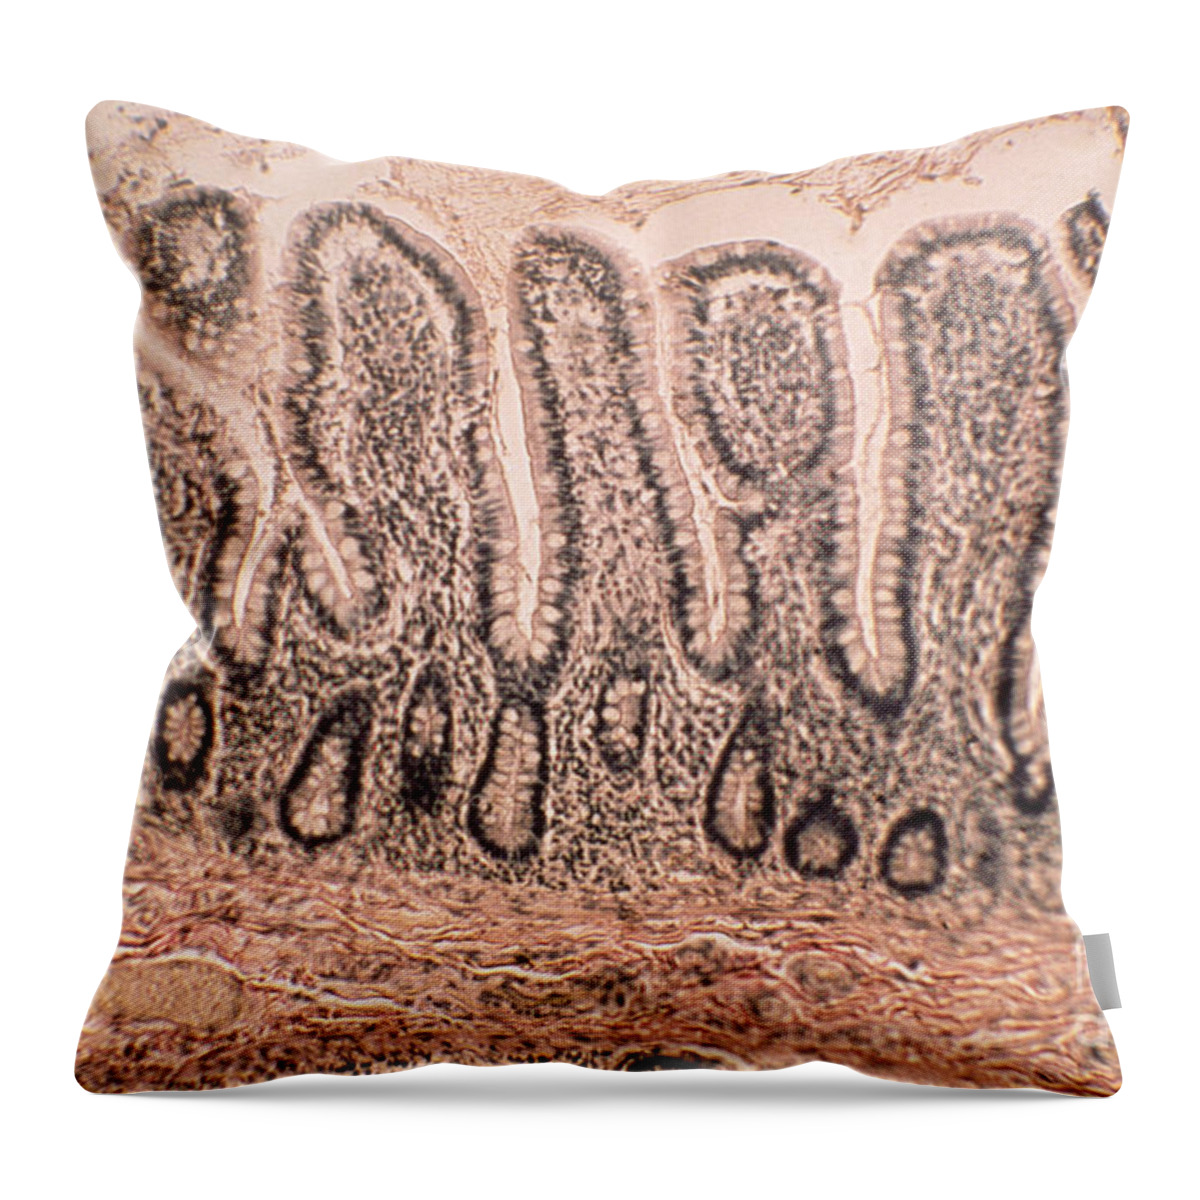 Histology Throw Pillow featuring the photograph Intestinal Villi Lm by Eric V. Grave